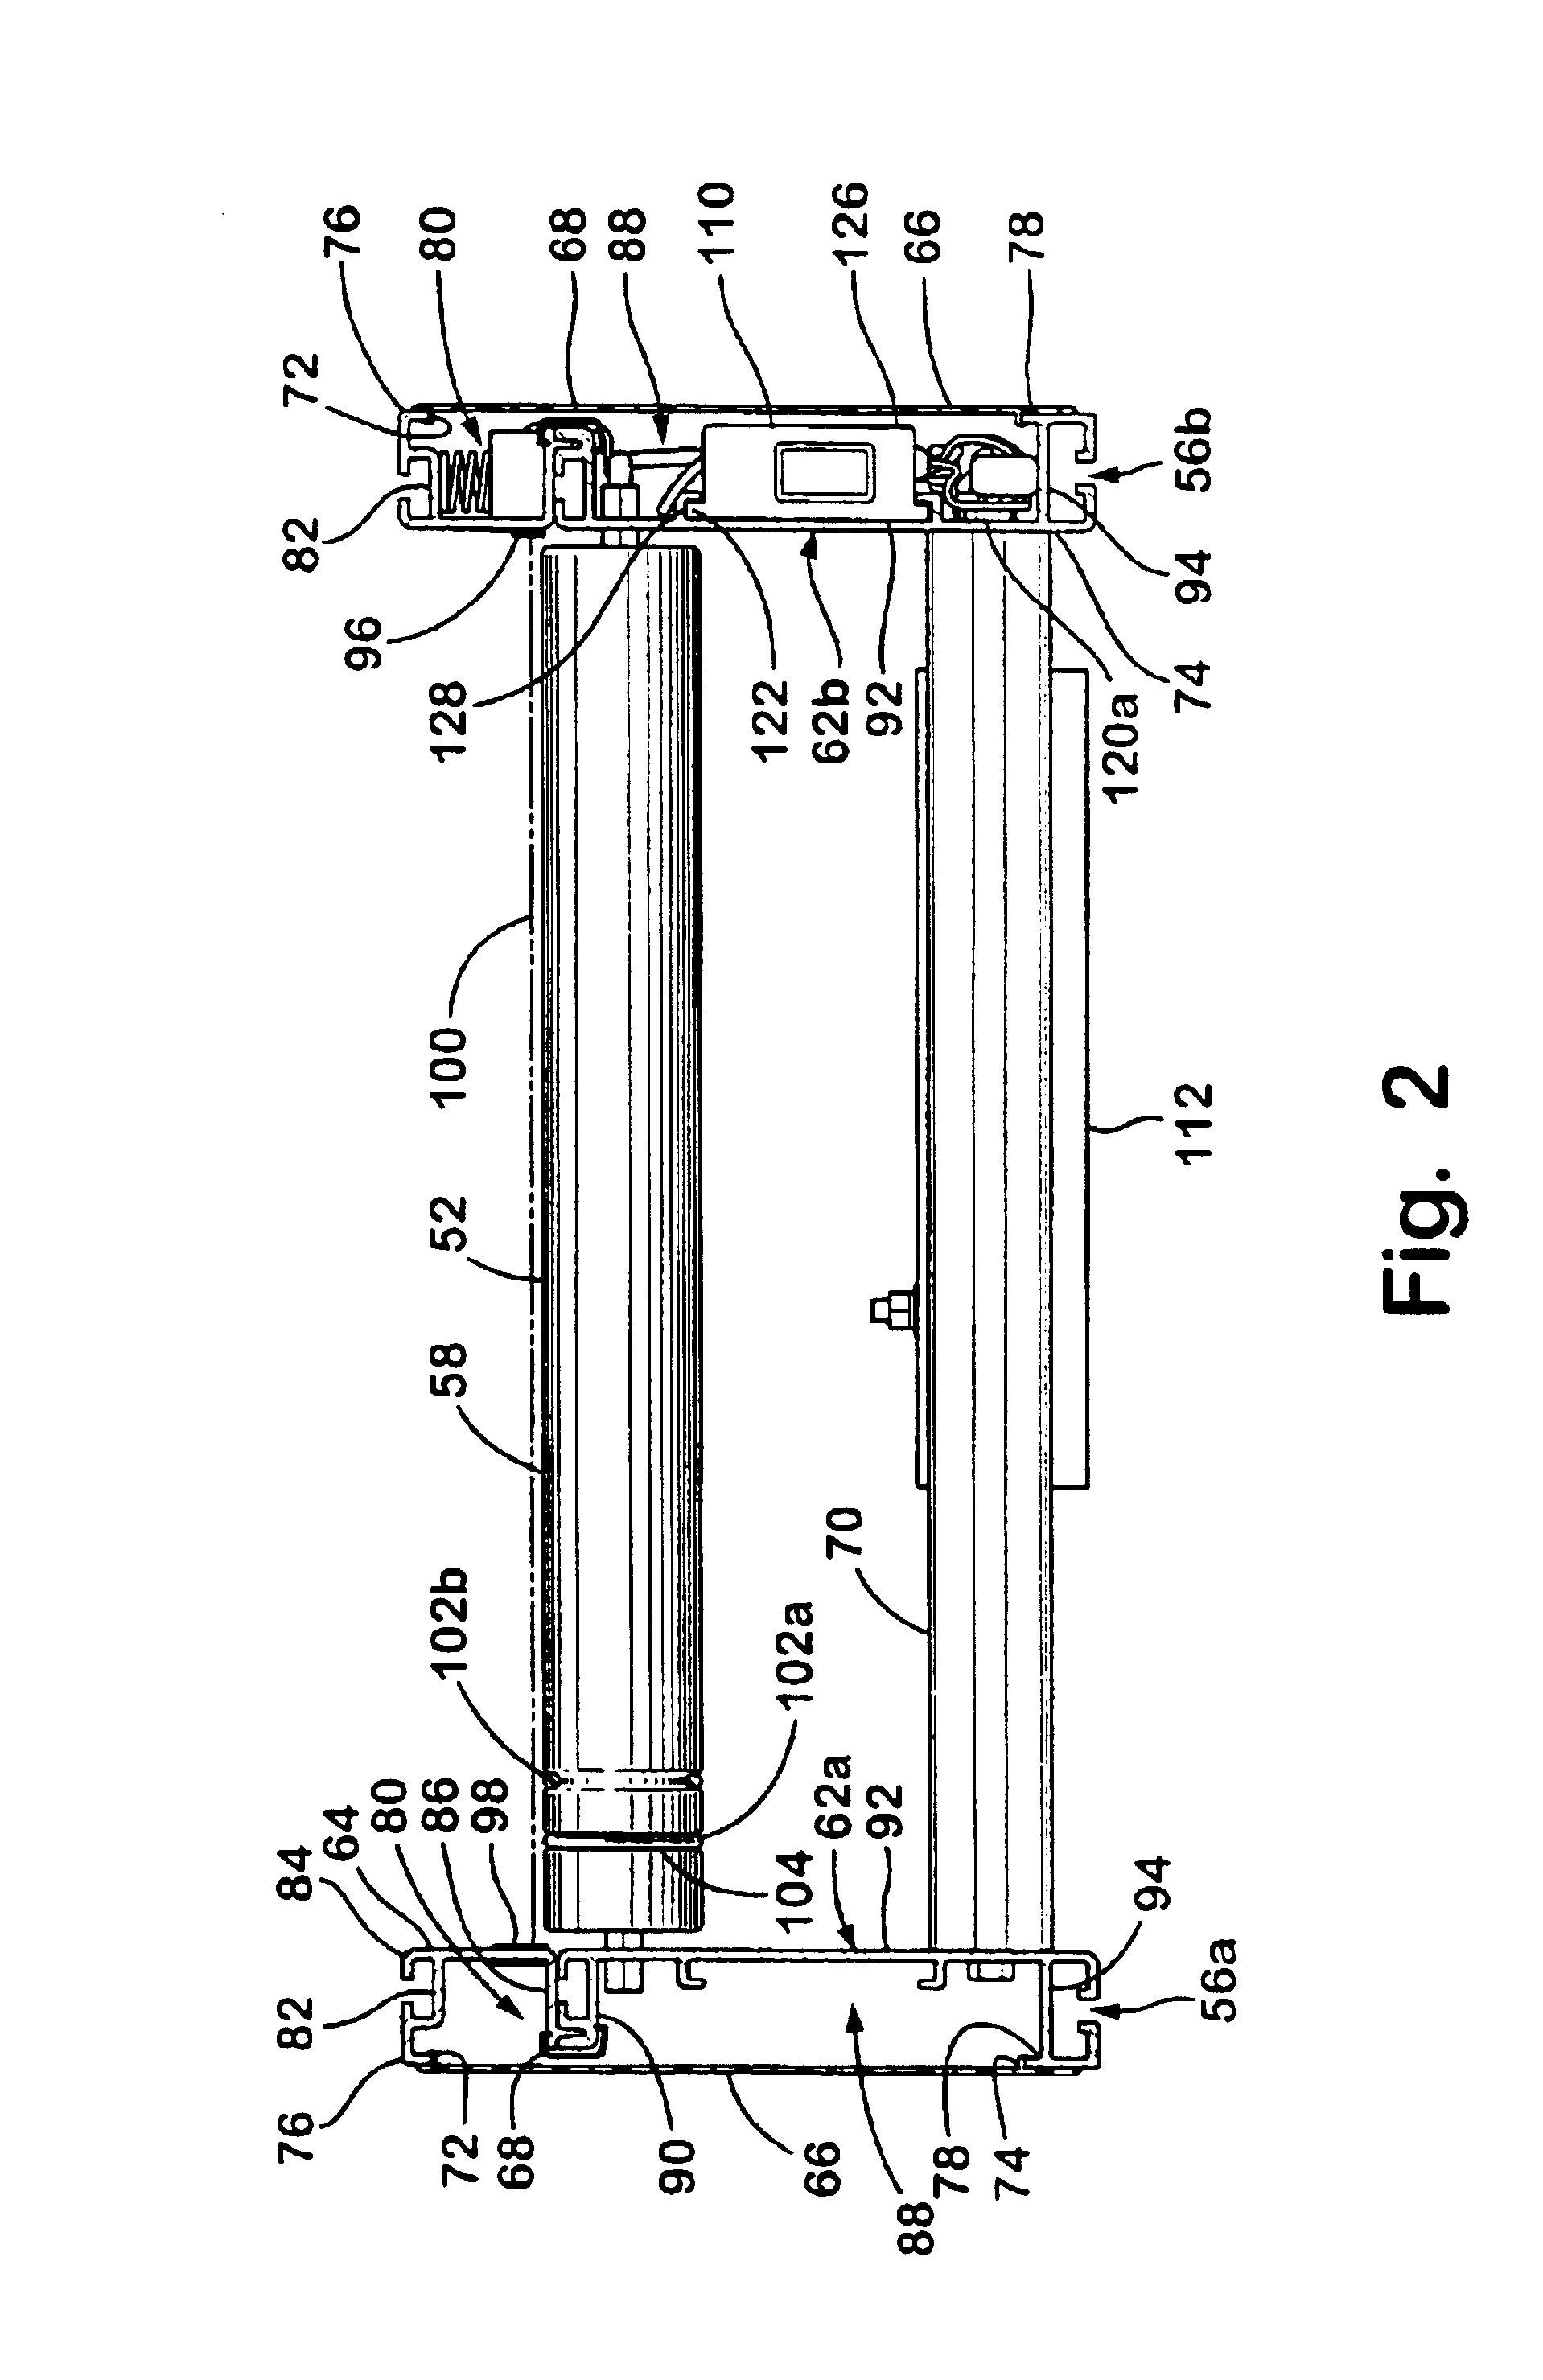 Integrated conveyor bed